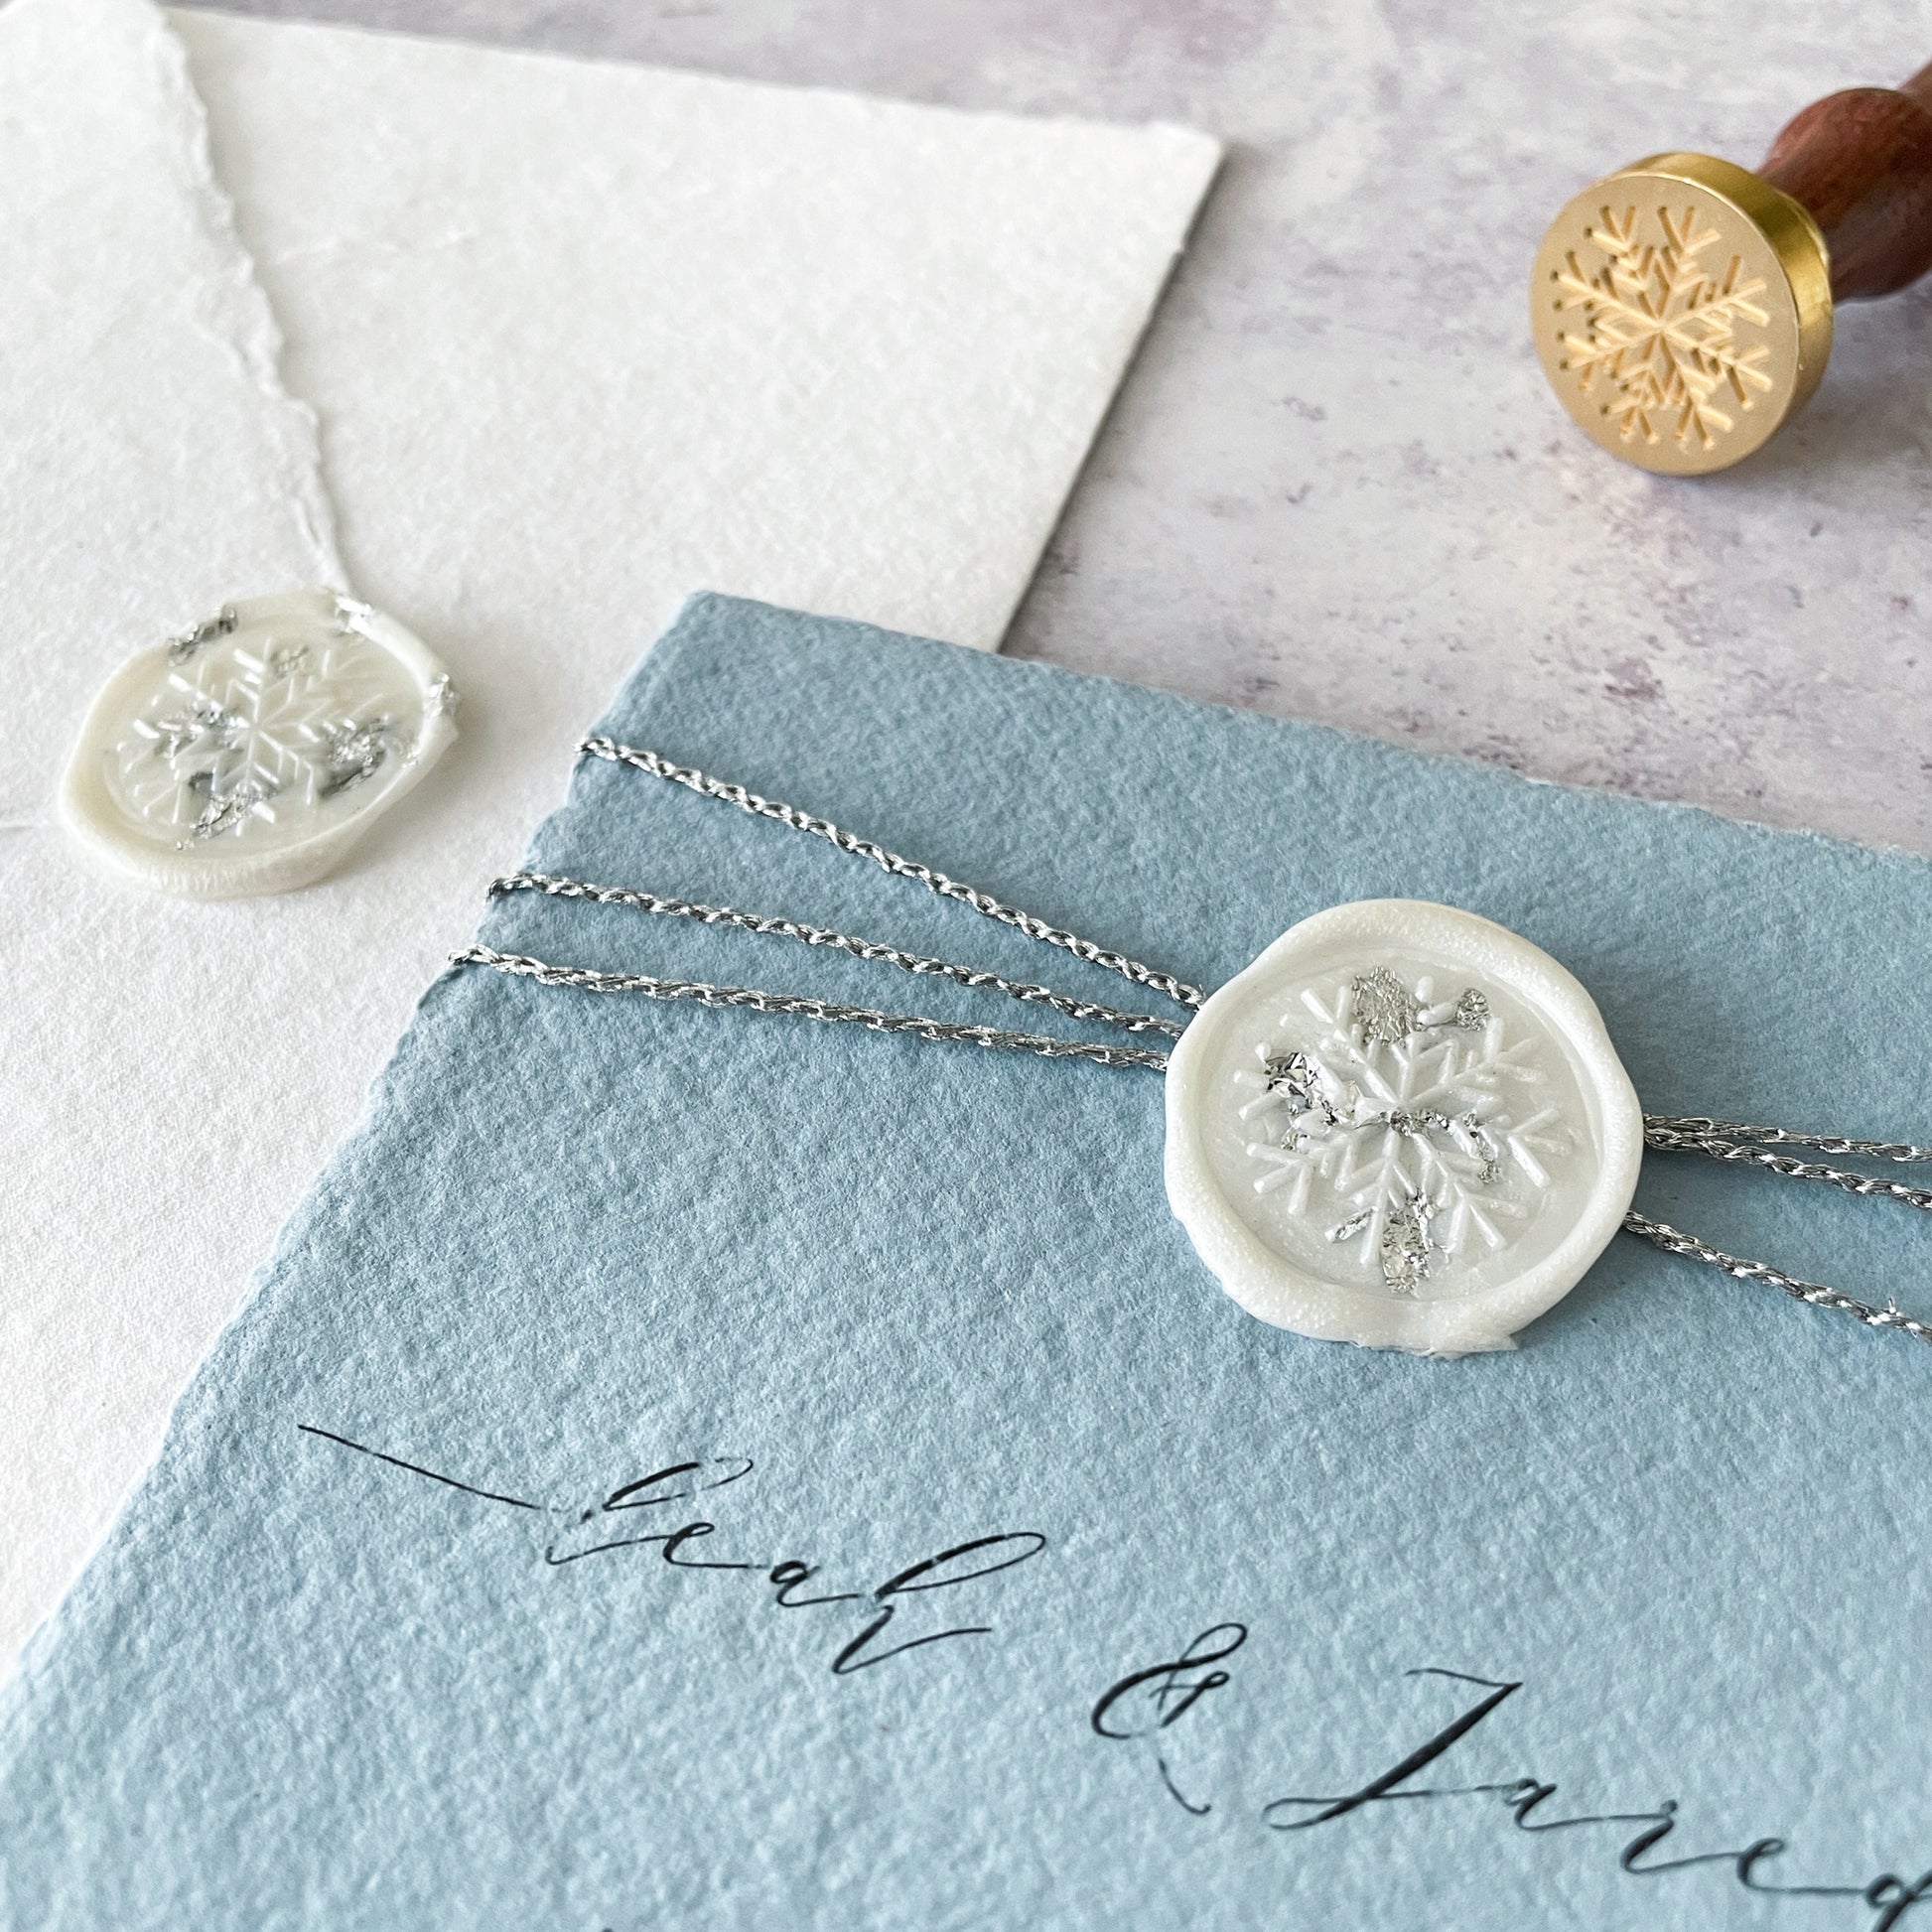 Snowflake wax seal.  Invitation made with pale blue hand made paper and pearlised white wax seal with snowflake print.  Silver, blue and white invitation